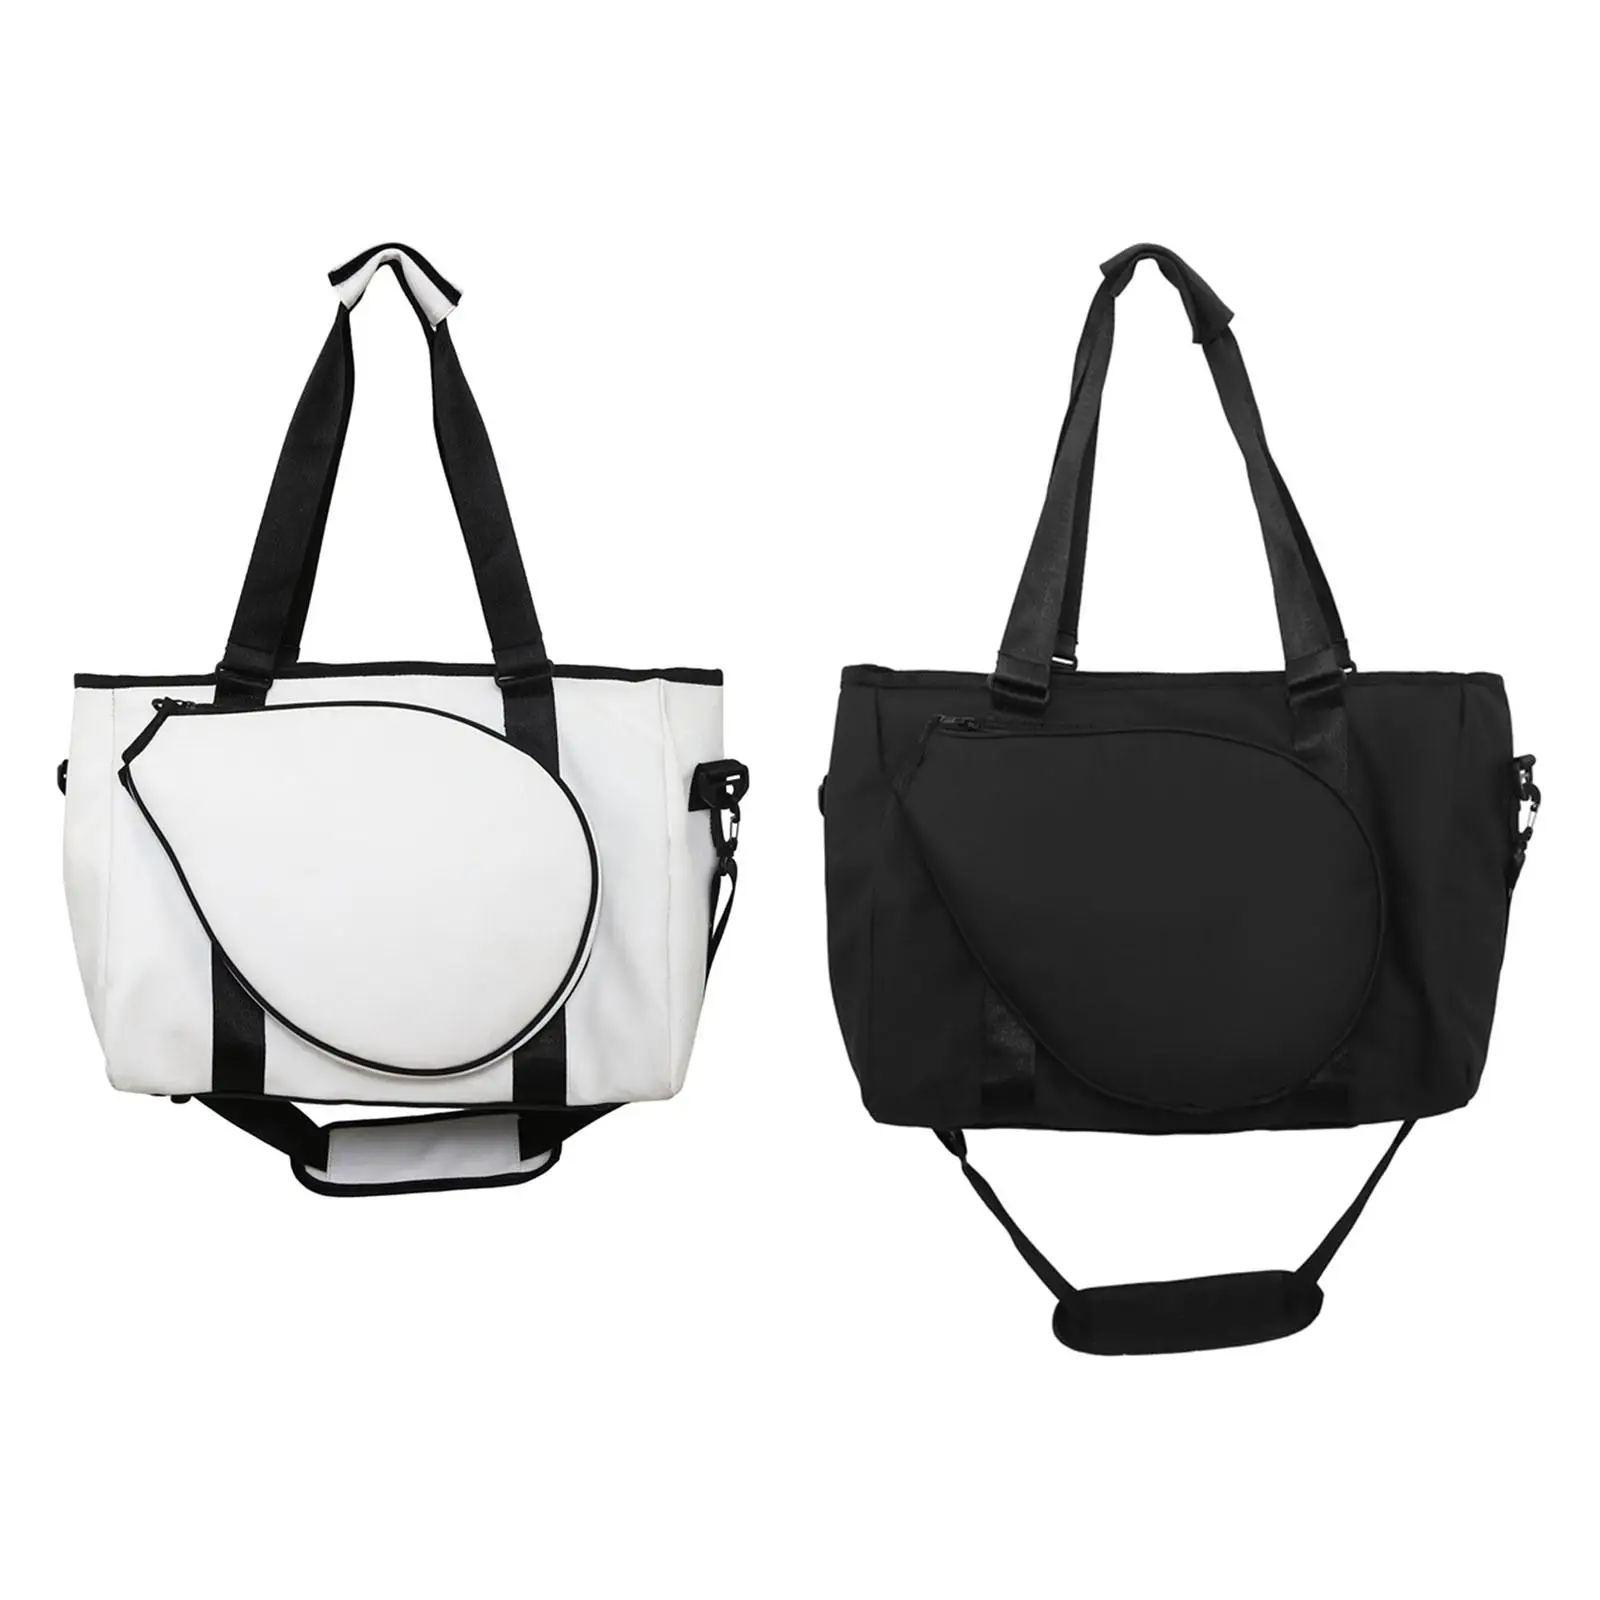 Tennis Racket Shoulder Bag Multifunctional Lightweight with Zipper for Women for Travel Clothes Fitness Outdoor Squash Racquets